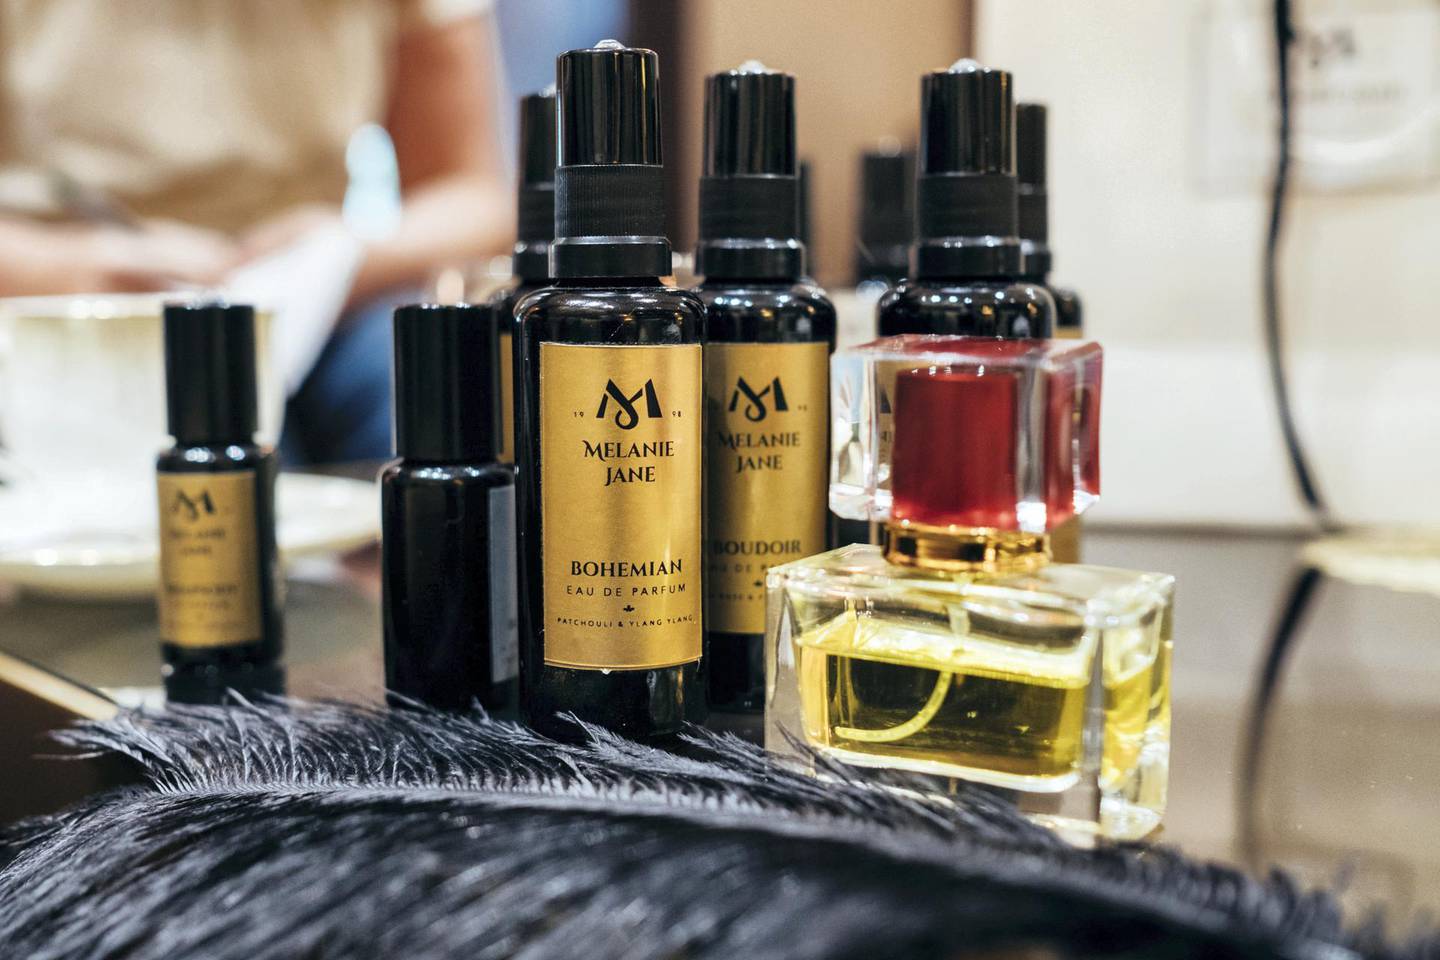 15.04.18 Melanie Jane, founder and owner of a make-your-own perfume workshop, using organic oils. Photographed at the Ritz Carlton, JBR Dubai.Anna Nielsen For The National